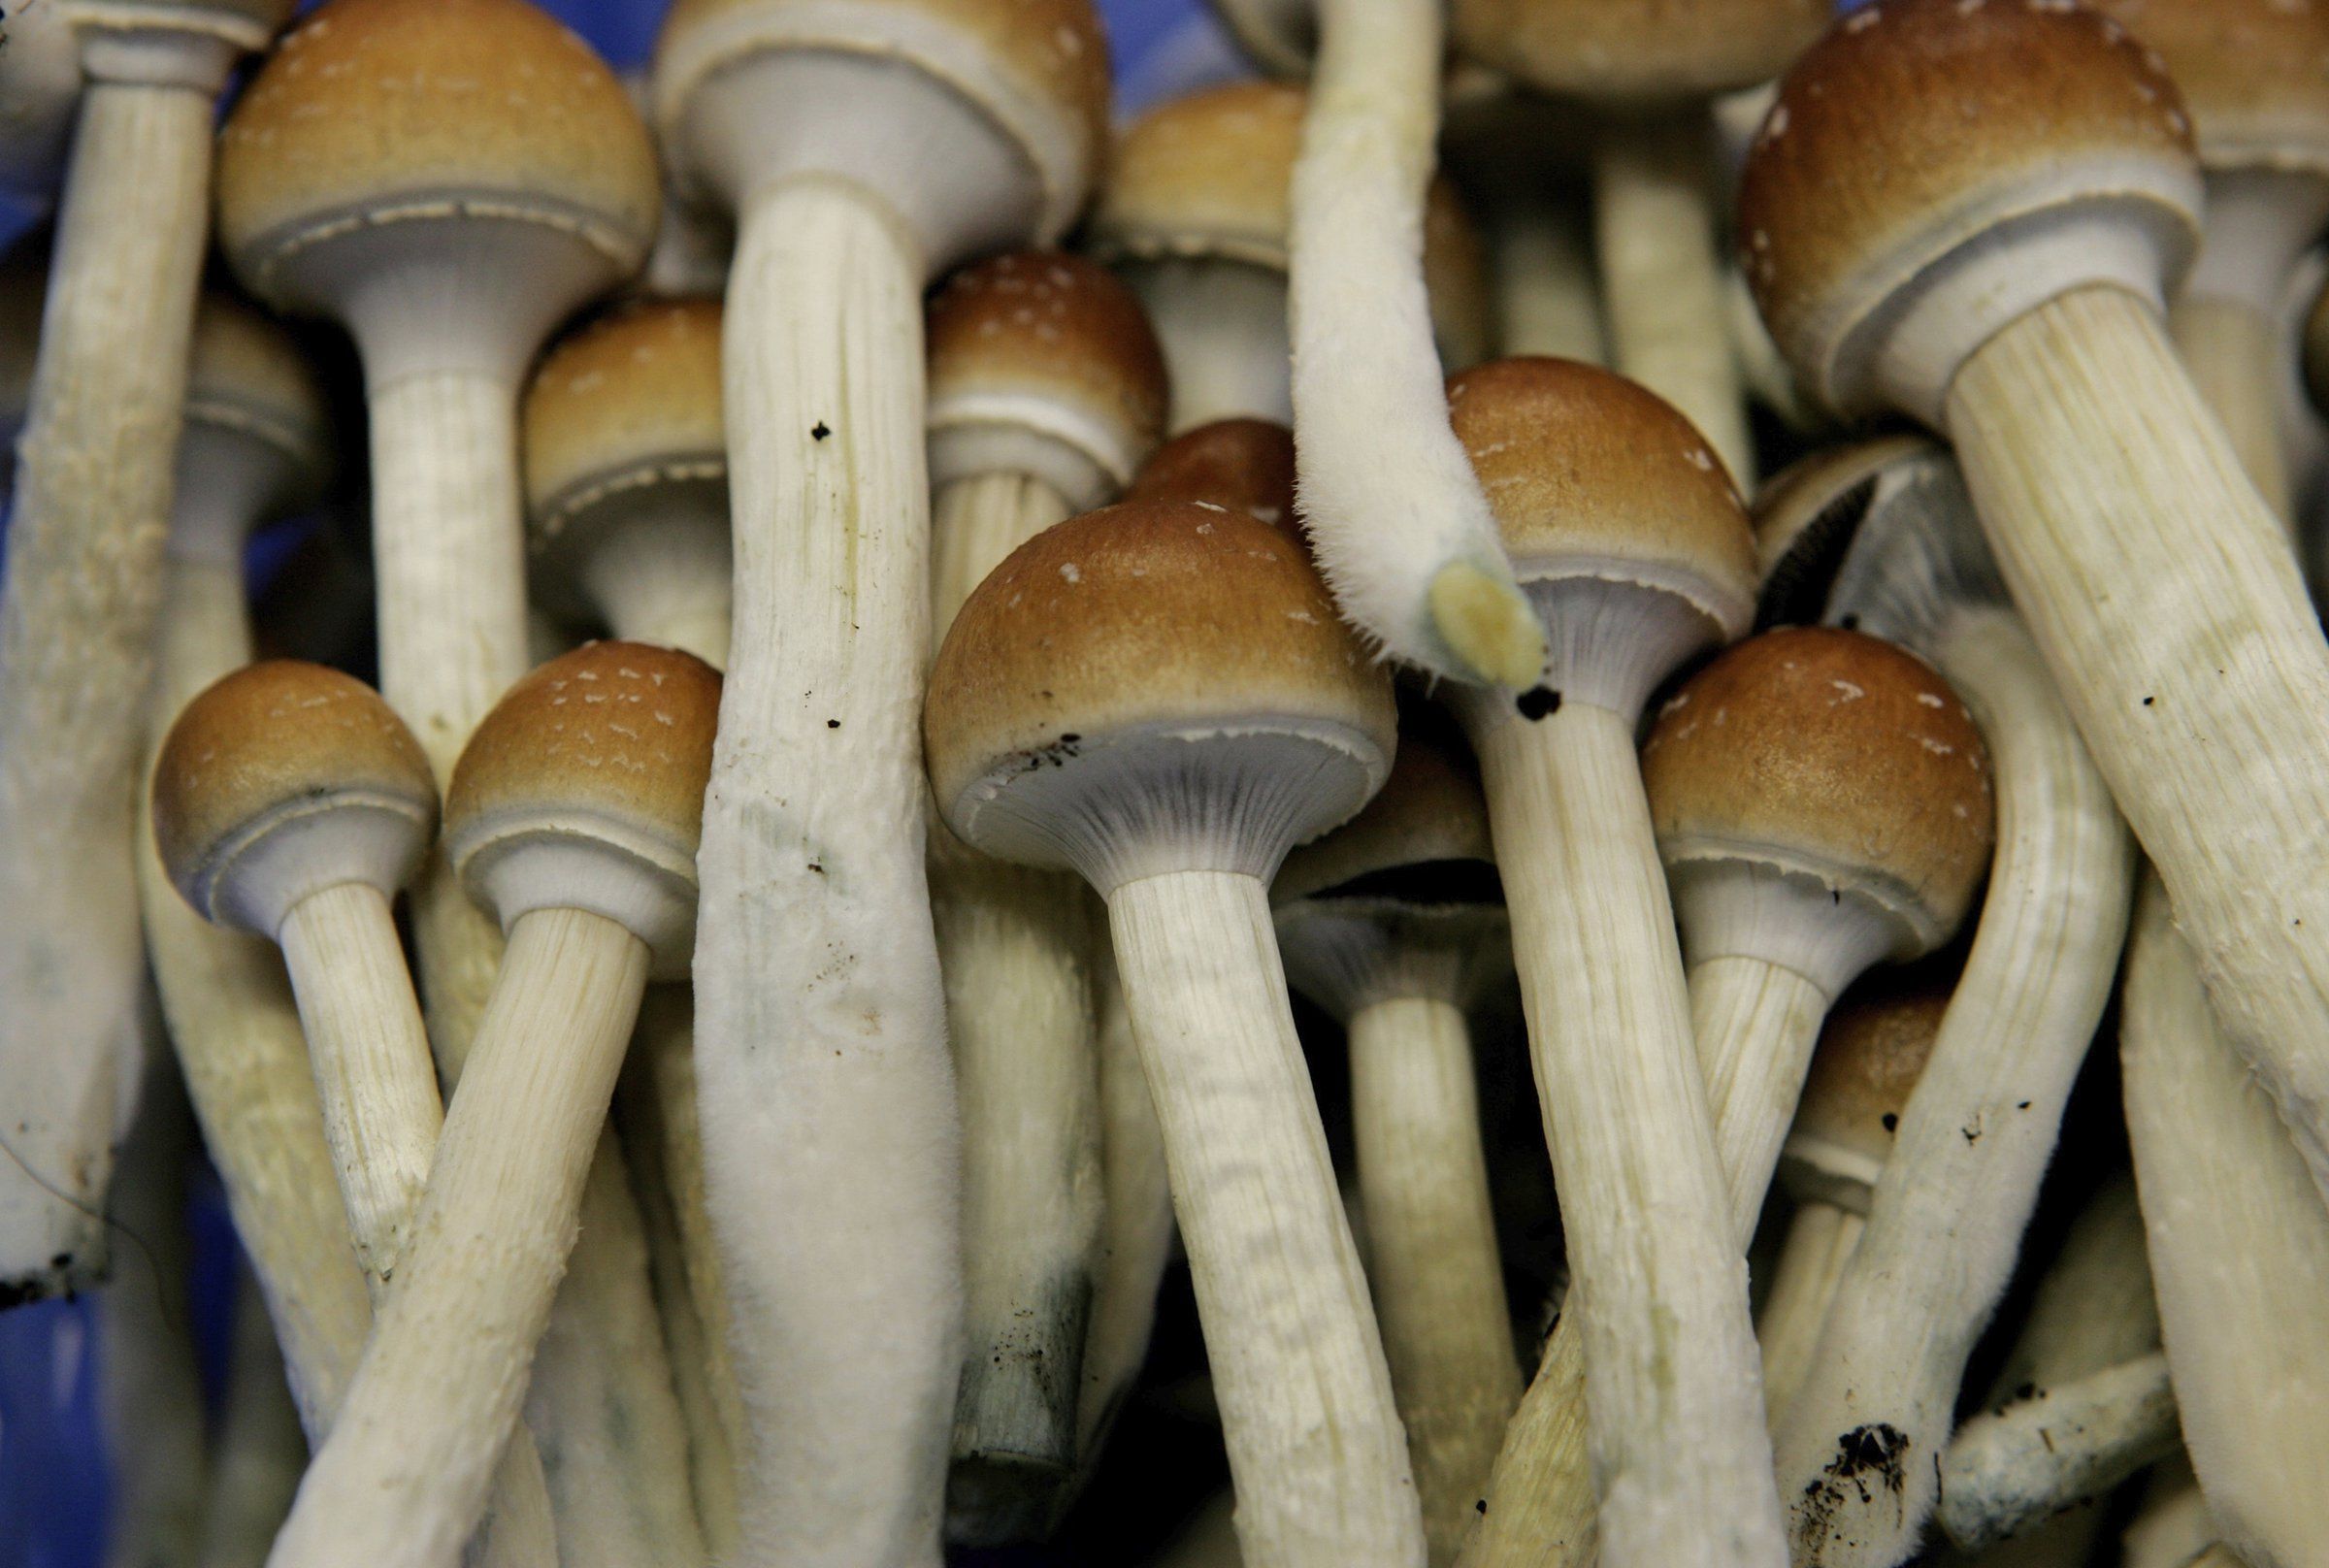 Research shows psychedelic mushrooms can help treat depression. Is legalization on the horizon for Washington? - The Seattle Times